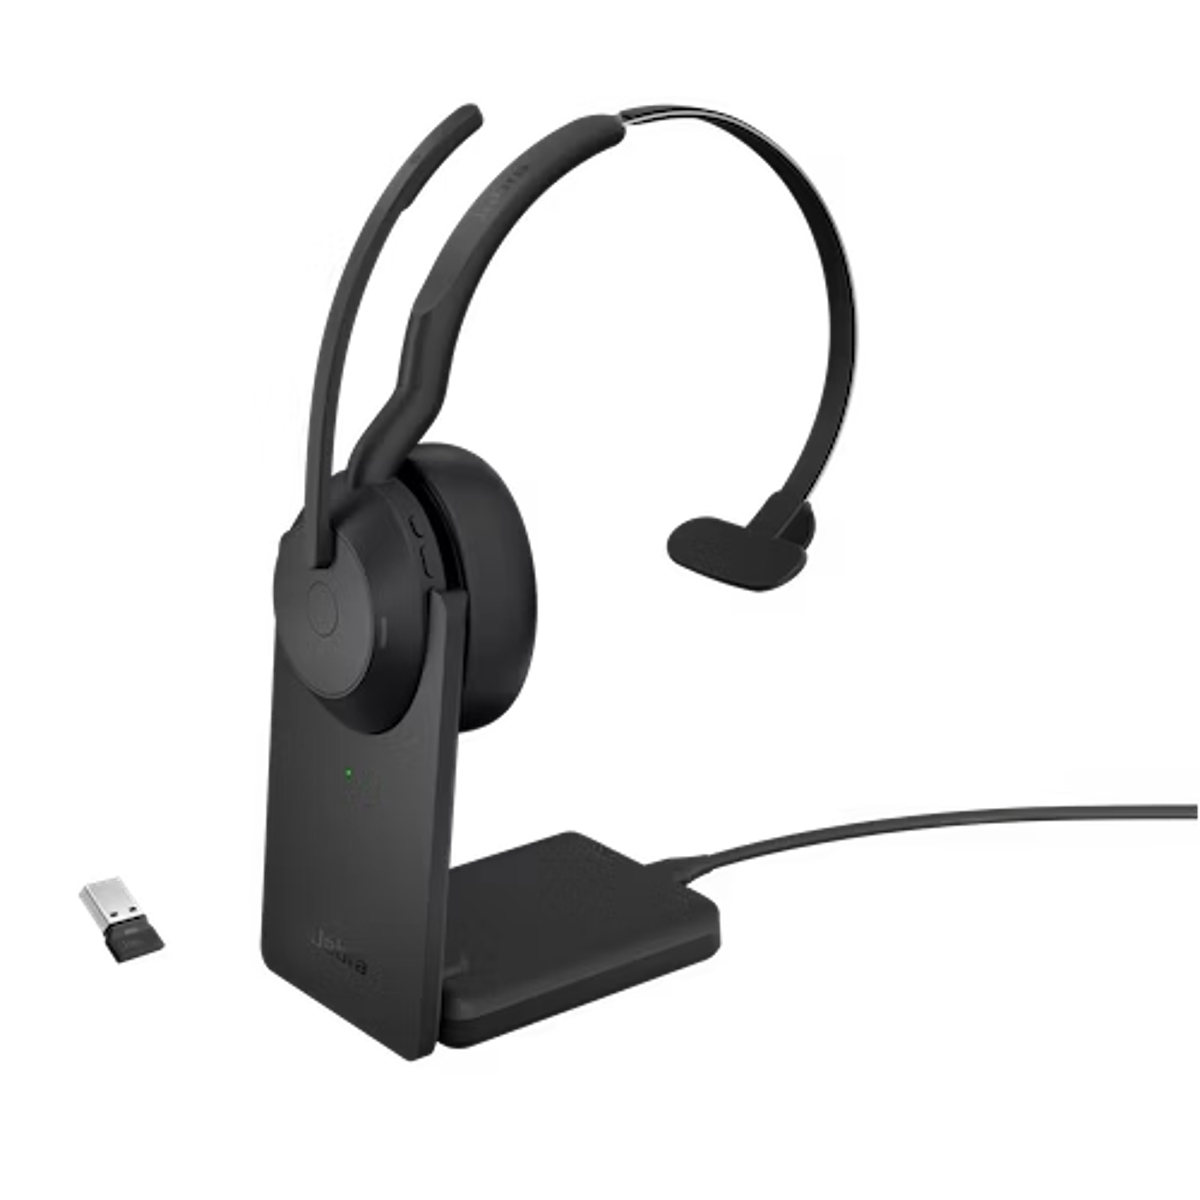 Jabra Launches a Foldable Evolve2 Headset and 5 other Products